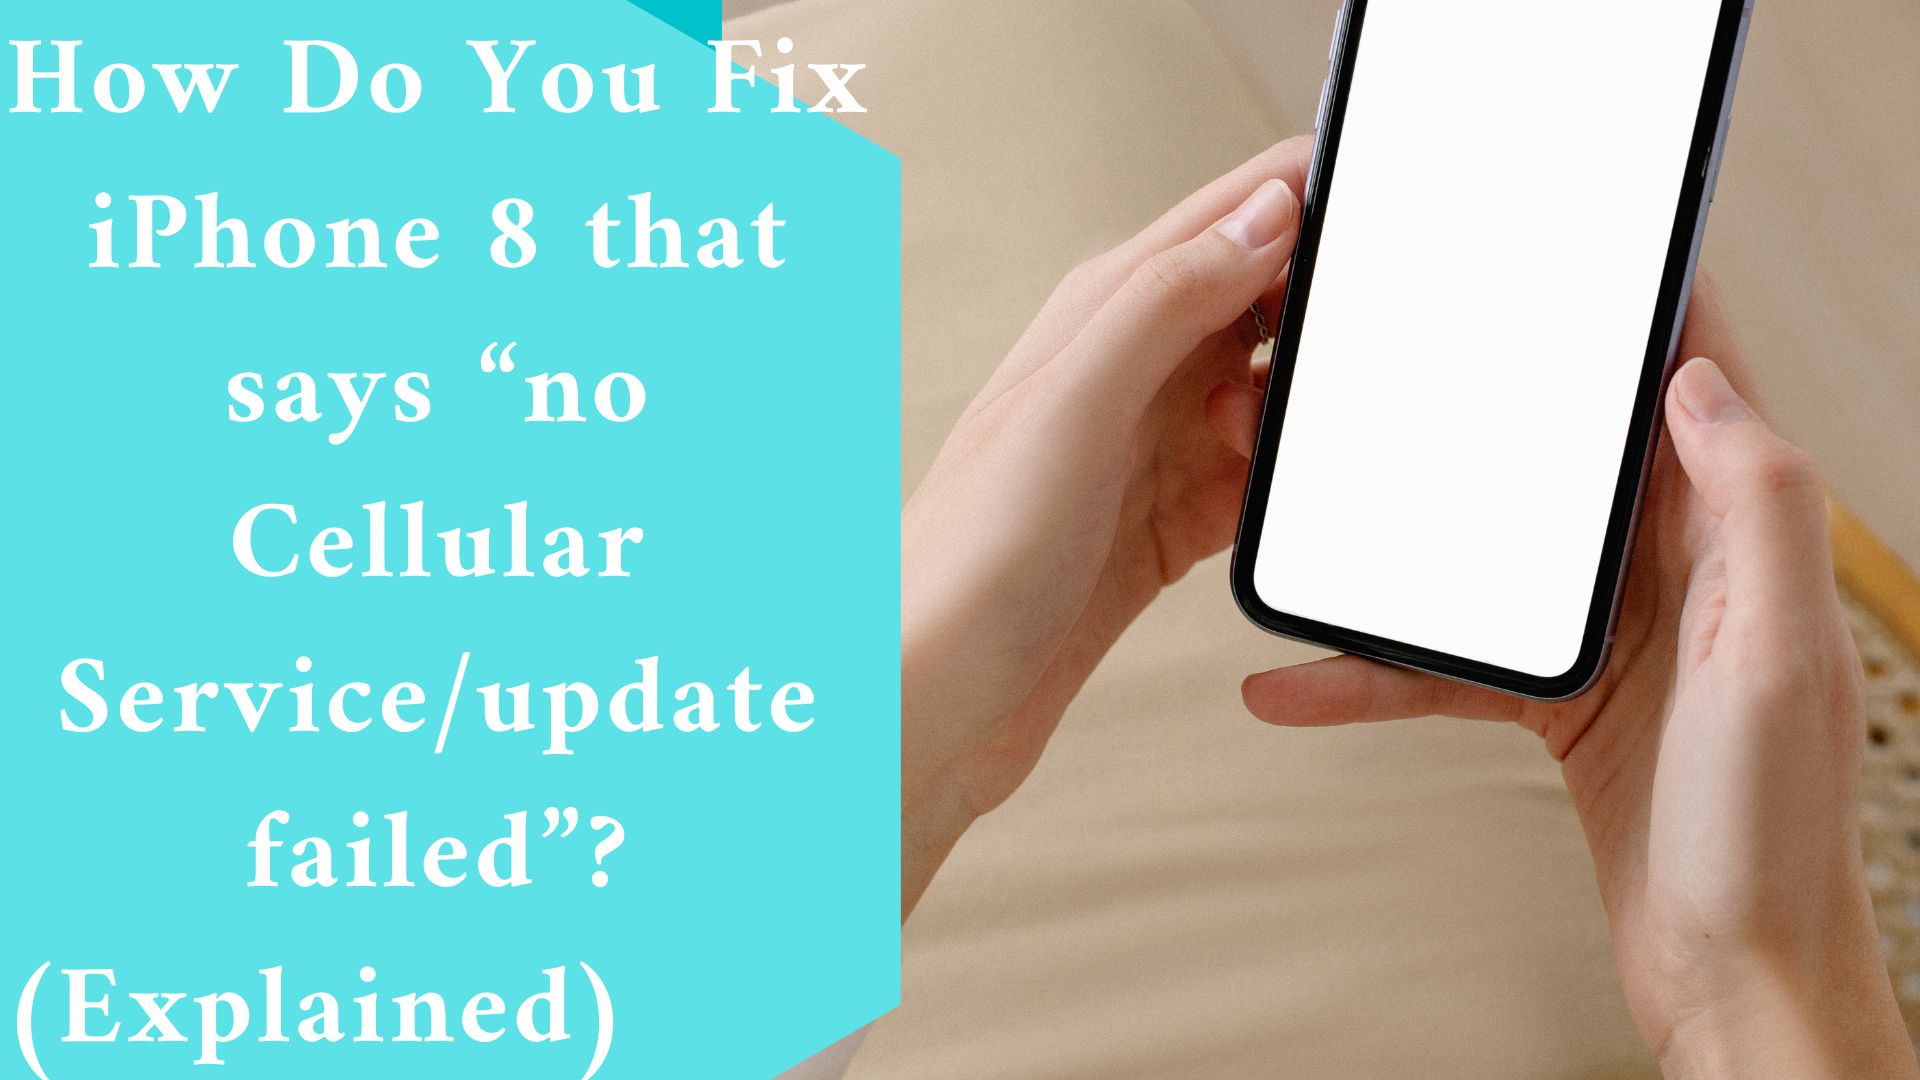 How Do You Fix iPhone 8 that says “no Cellular Service/update failed”? (Explained)